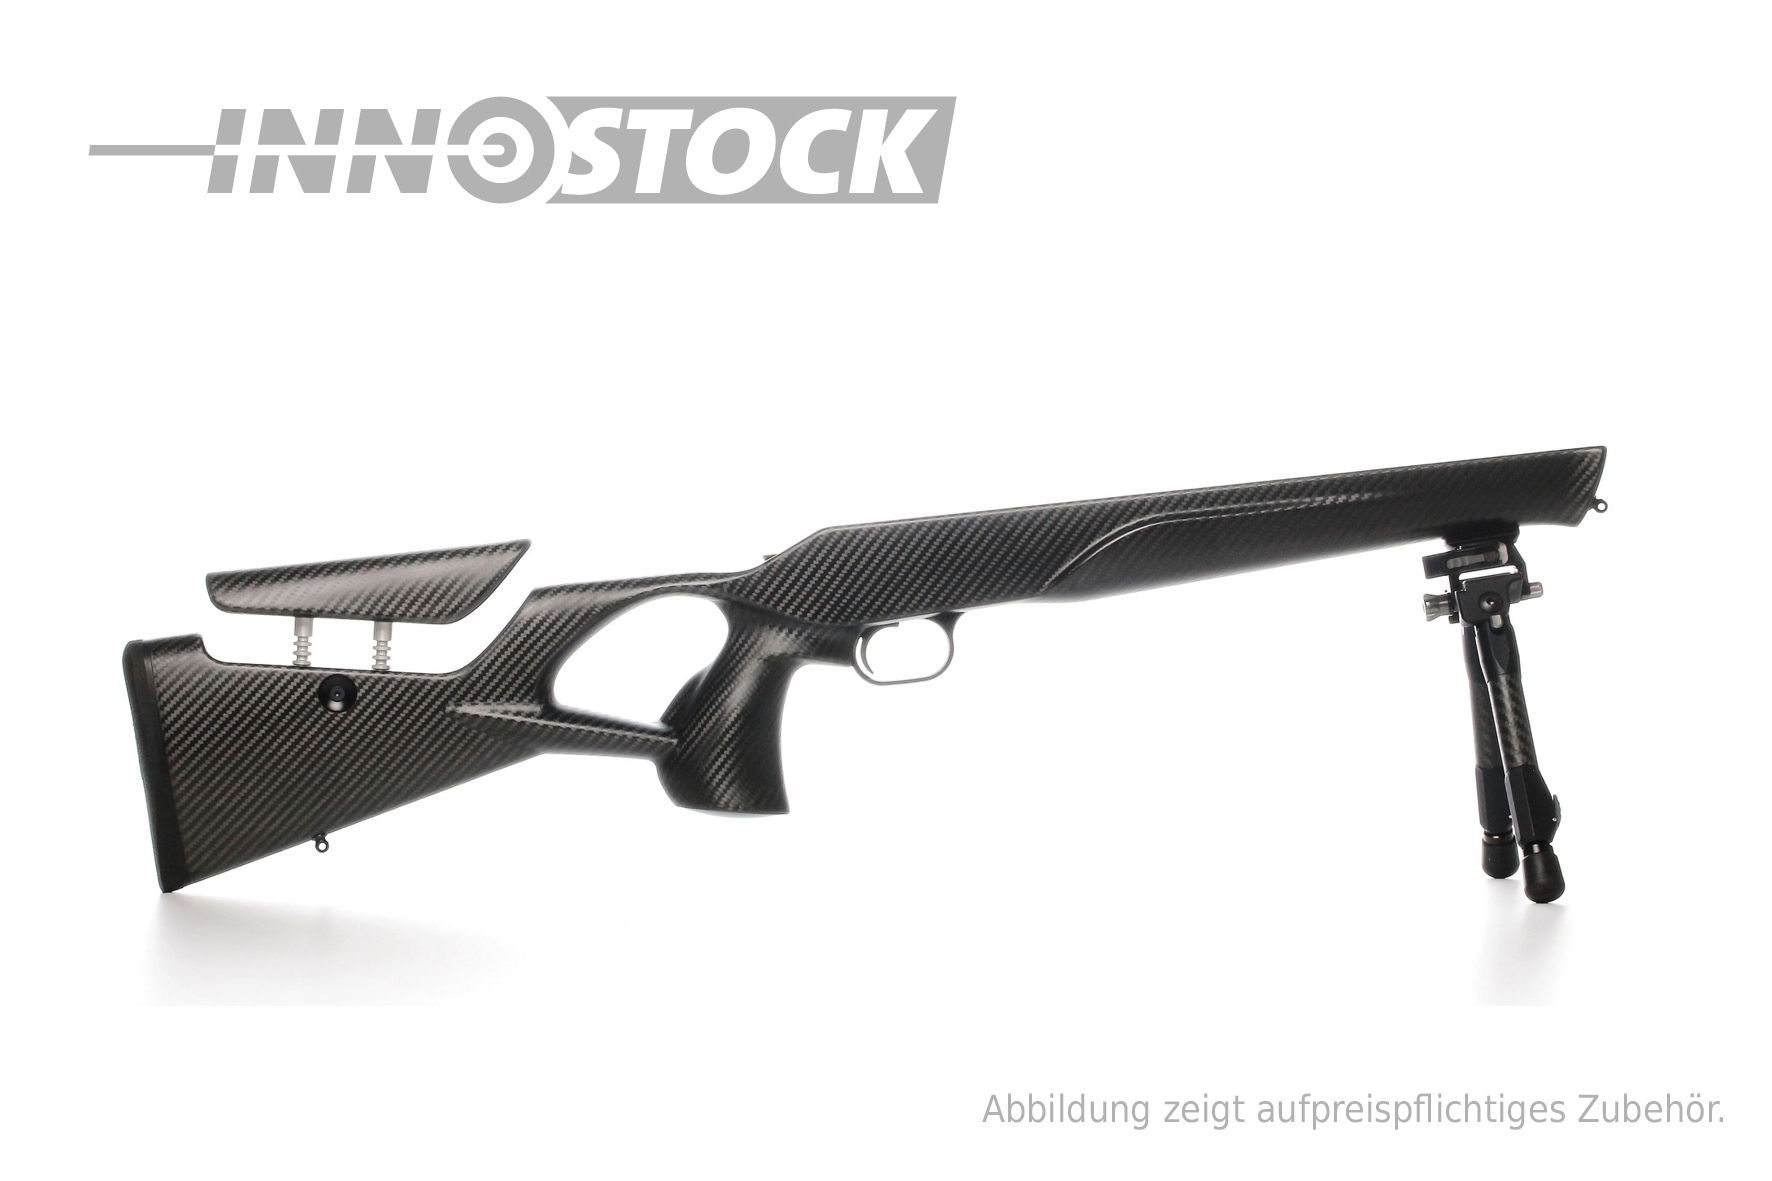 Carbon Stock - M82 - for System Blaser R8 - Semi Weight (19MM) - inkl. Spartan Adapter